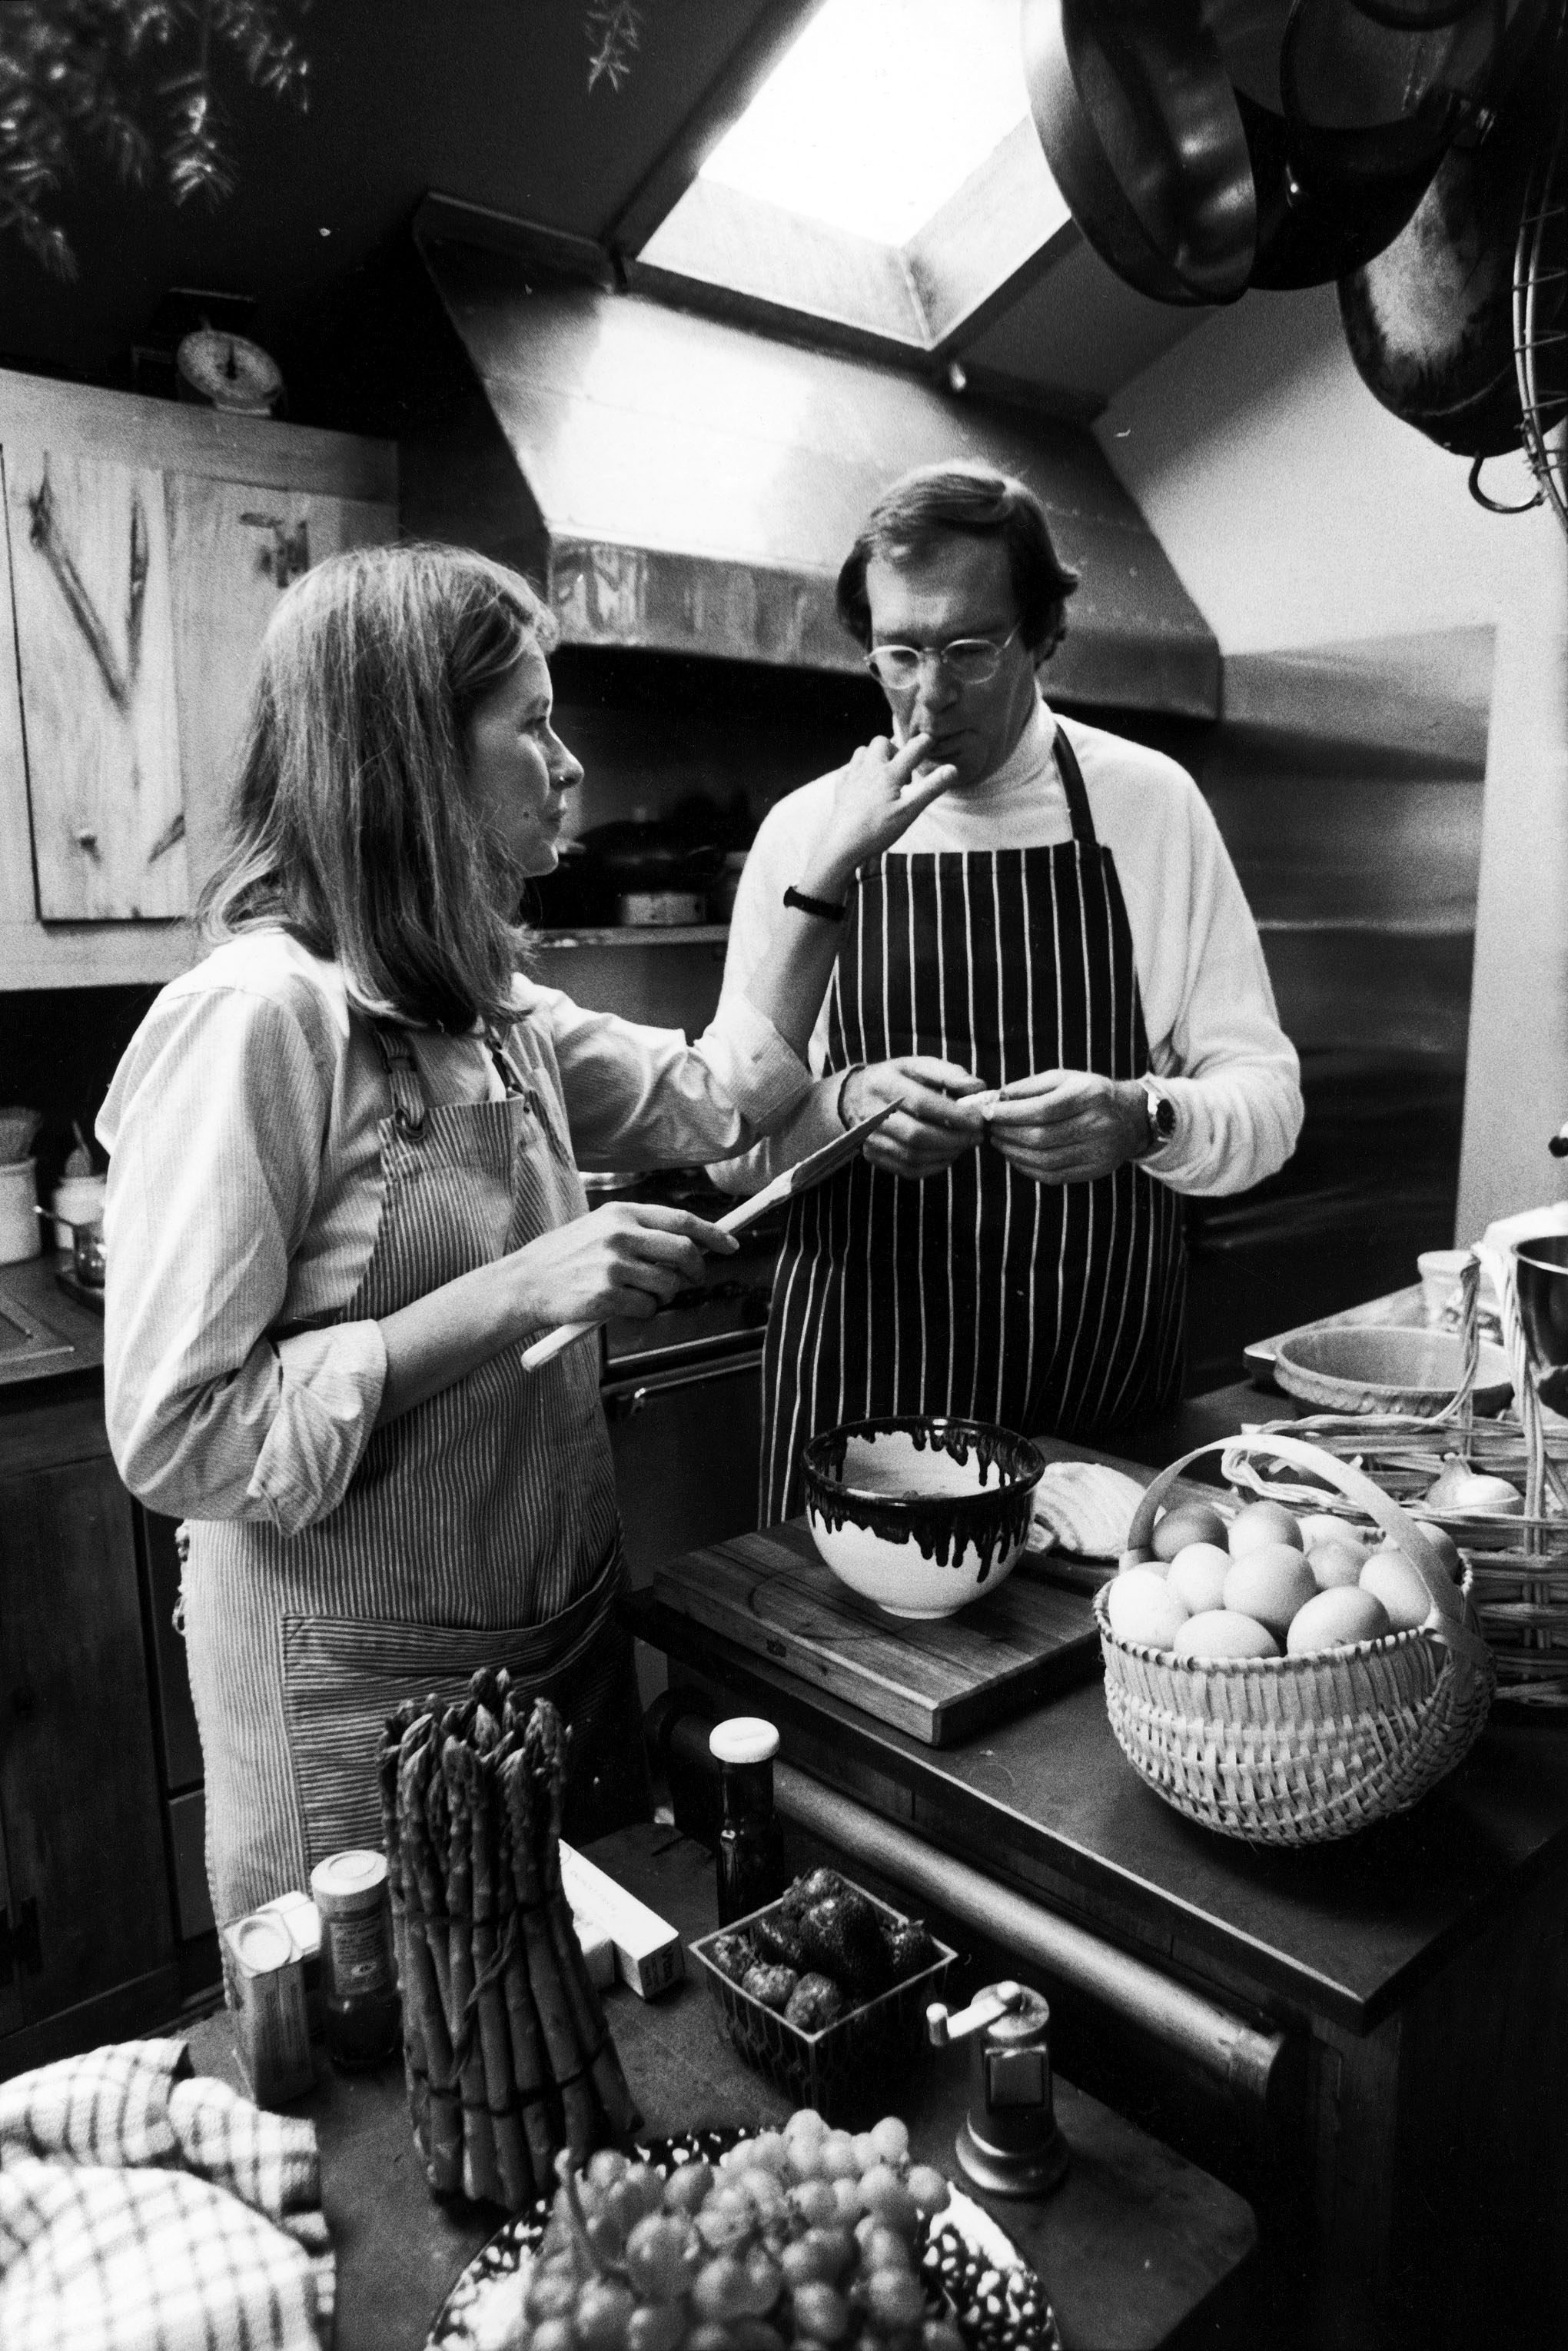 Martha and Andrew Stewart baking in their kitchen on March 24, 1980 | Source: Getty Images